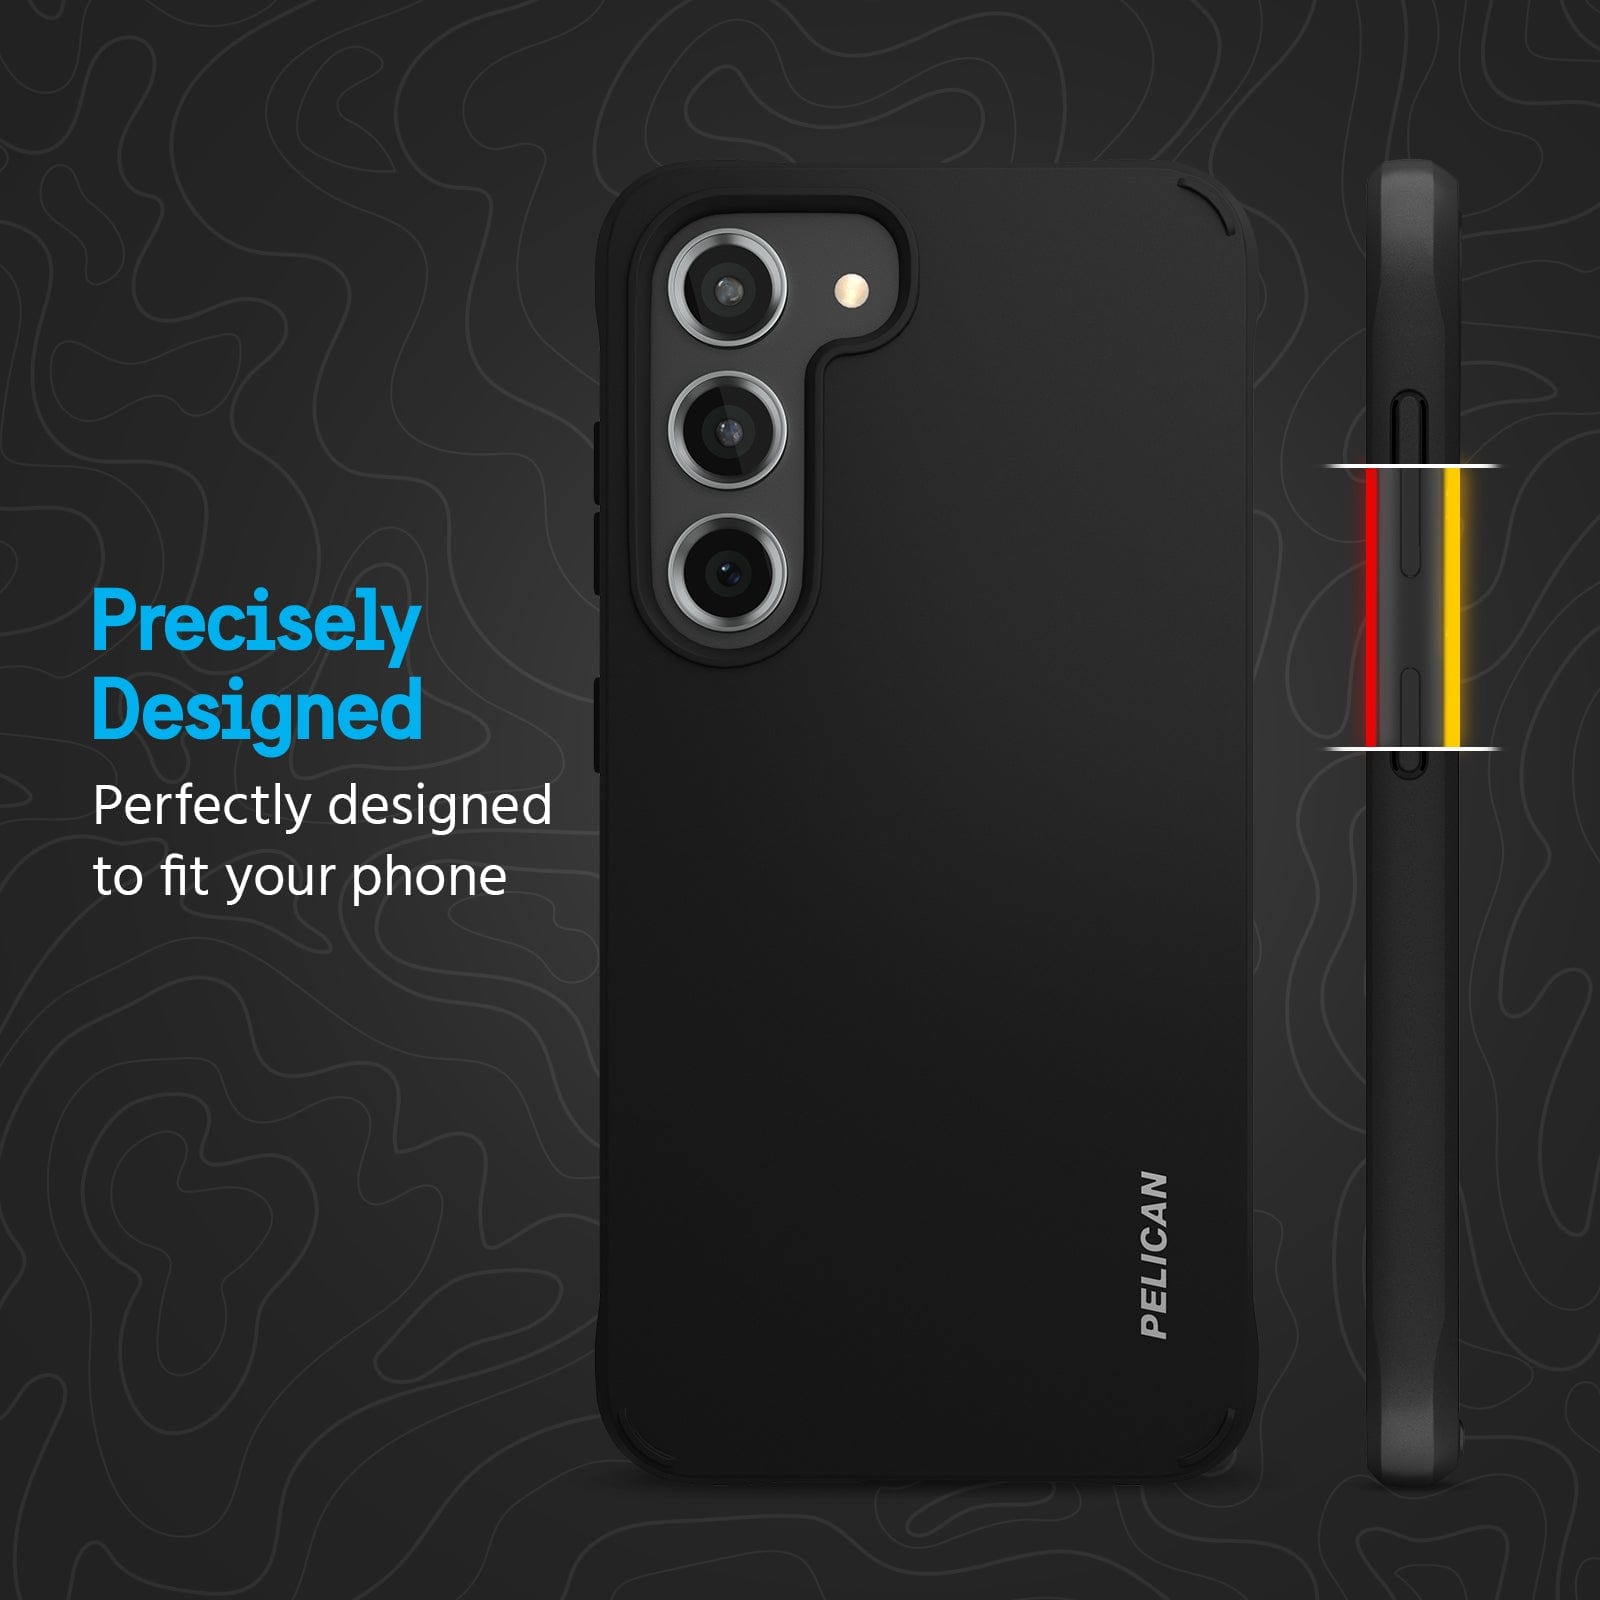 PRECISELY DESIGNED. PERFECTLY DESIGNED TO FIT YOUR PHONE.